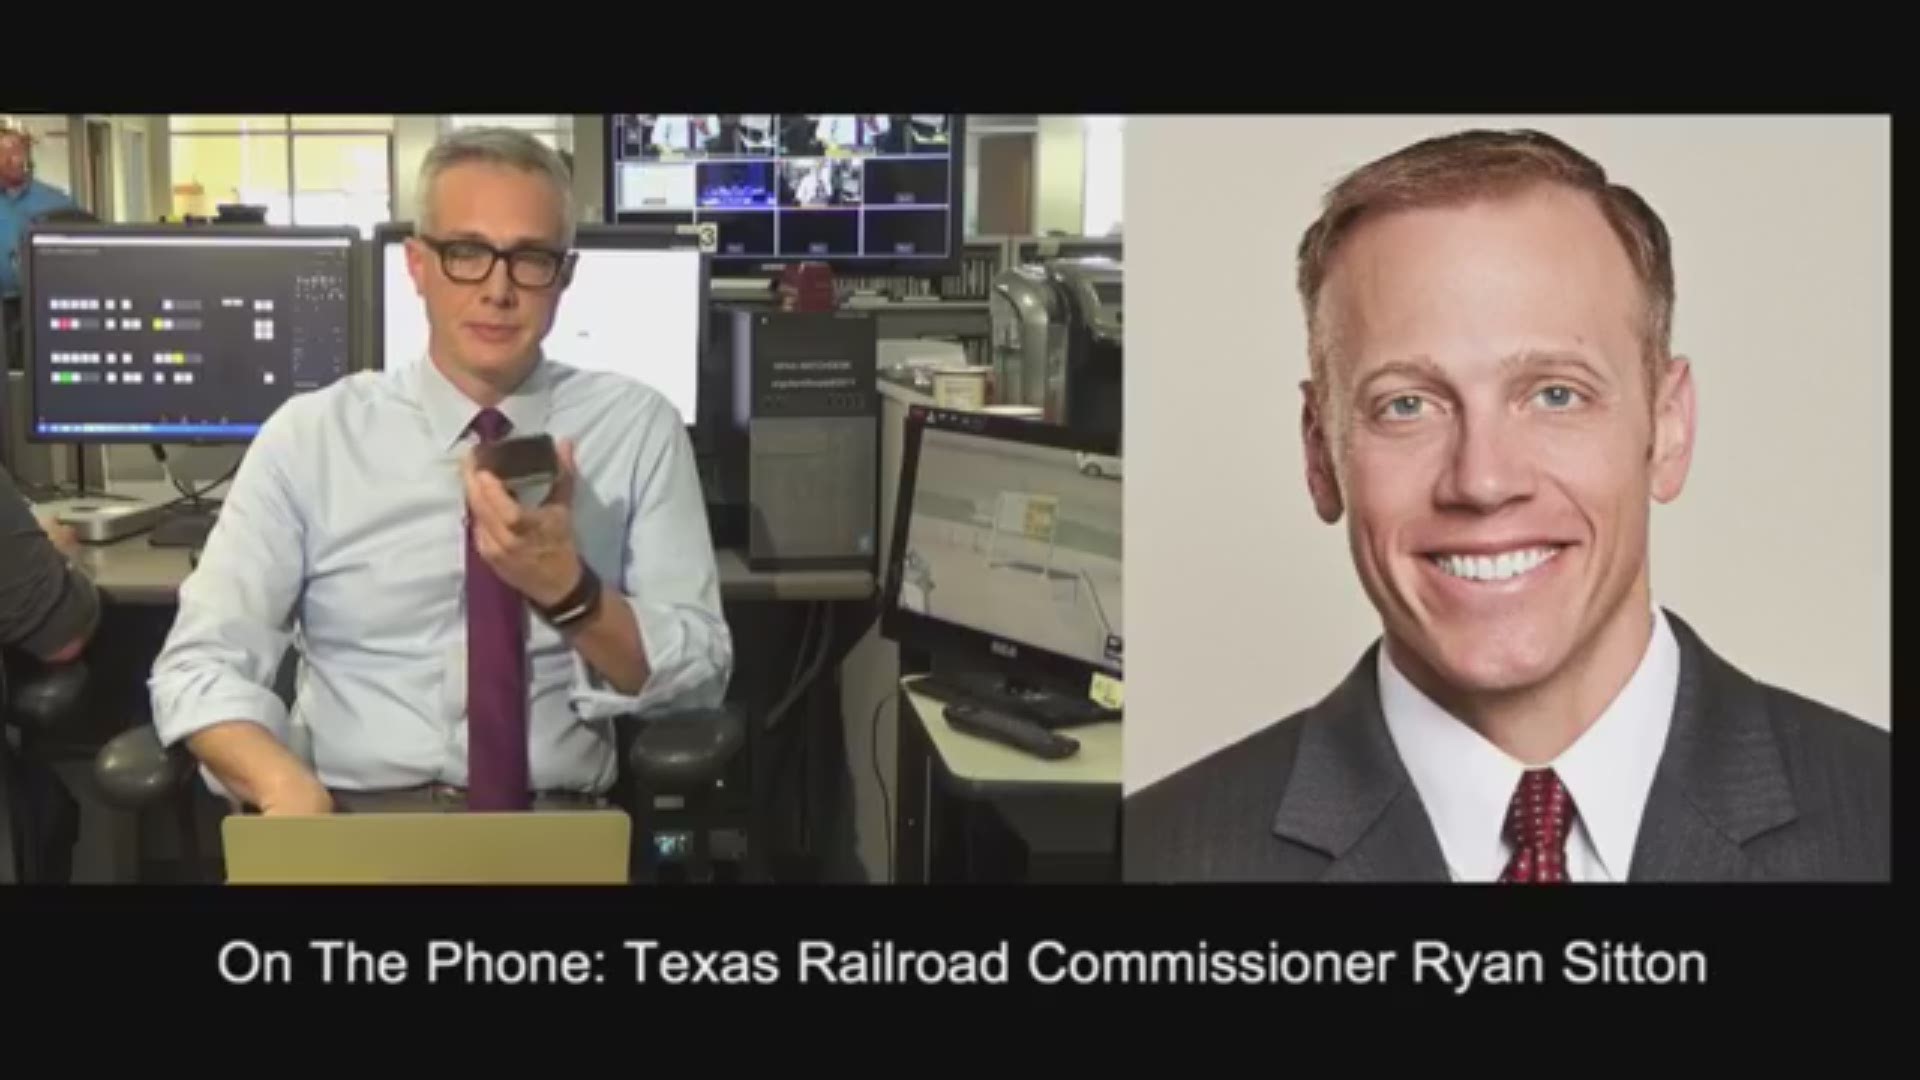 Texas Railroad Commissioner Ryan Sitton tells WFAA there is not a fuel crisis in Texas.